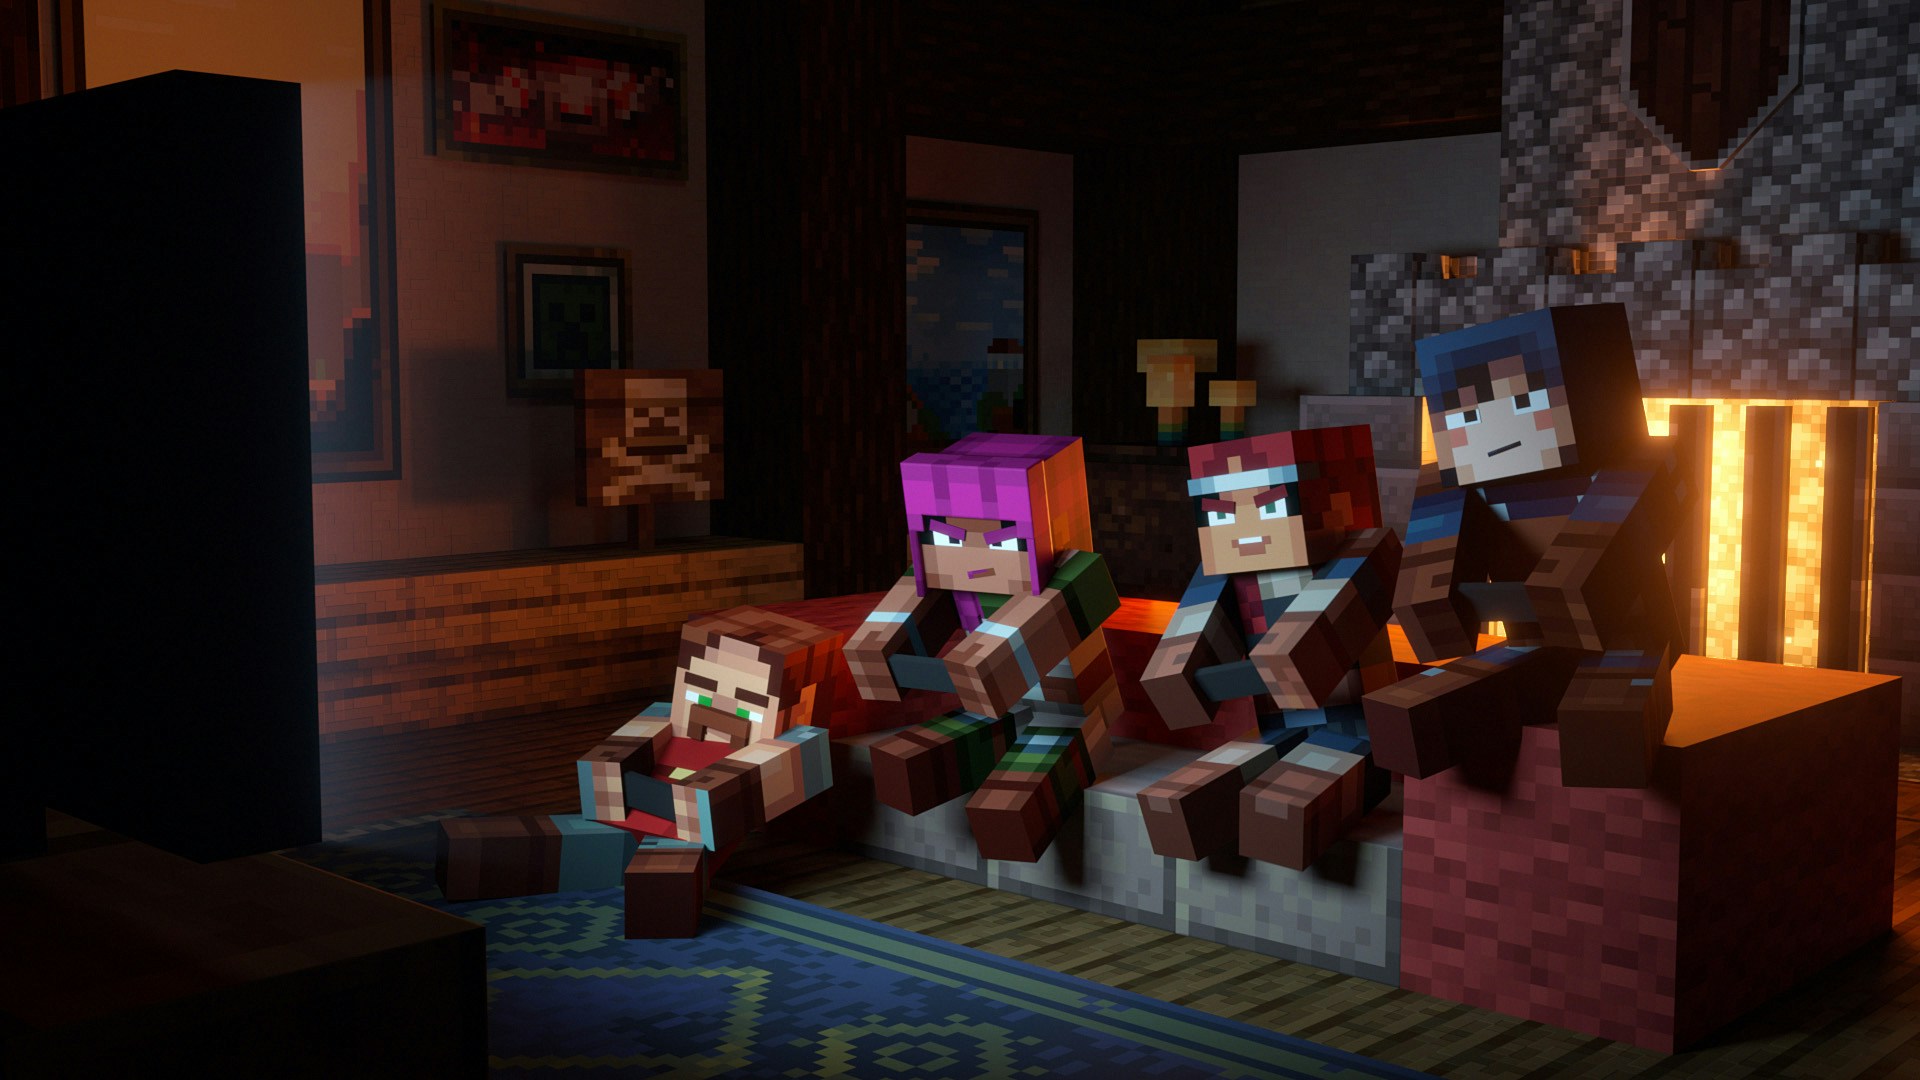 Adrien, Hal, Hex and Valorie are inside a cosy cabin with a fireplace in the background. They are sitting in a sofa playing minecraft dungeons on a TV in the foreground